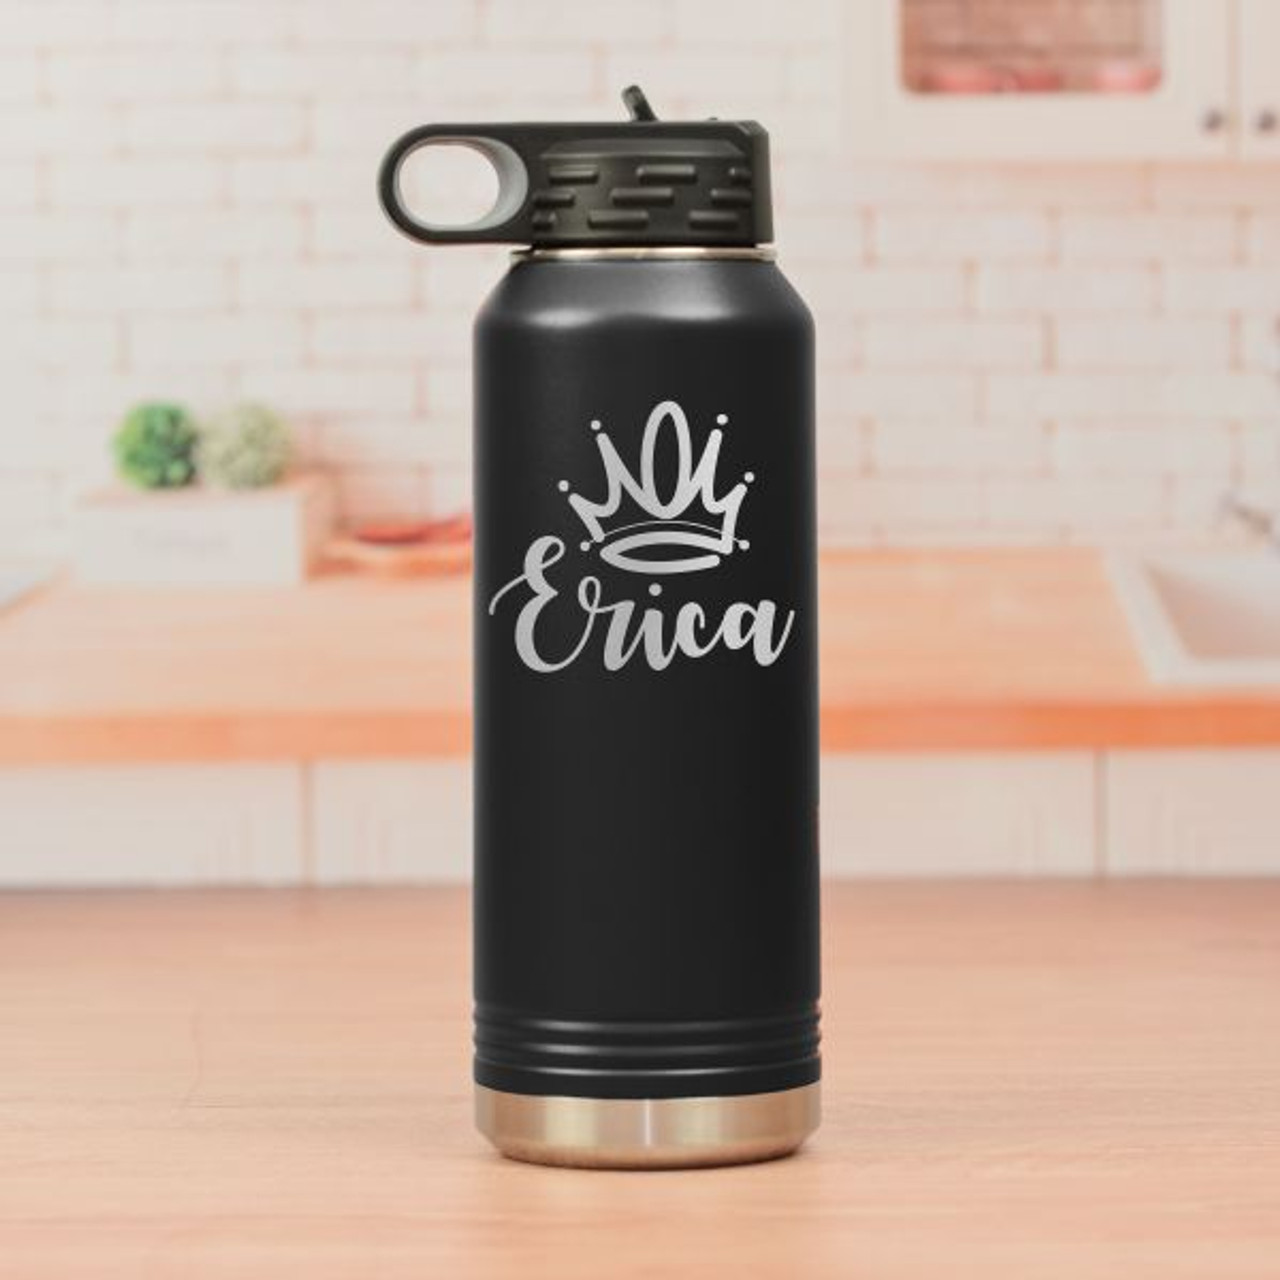 https://cdn11.bigcommerce.com/s-mdwz5t7wme/images/stencil/1280x1280/products/2778/6856/DW5126-All-Hail-the-Queen-water-bottle-k__86804.1614192678.jpg?c=2?imbypass=on